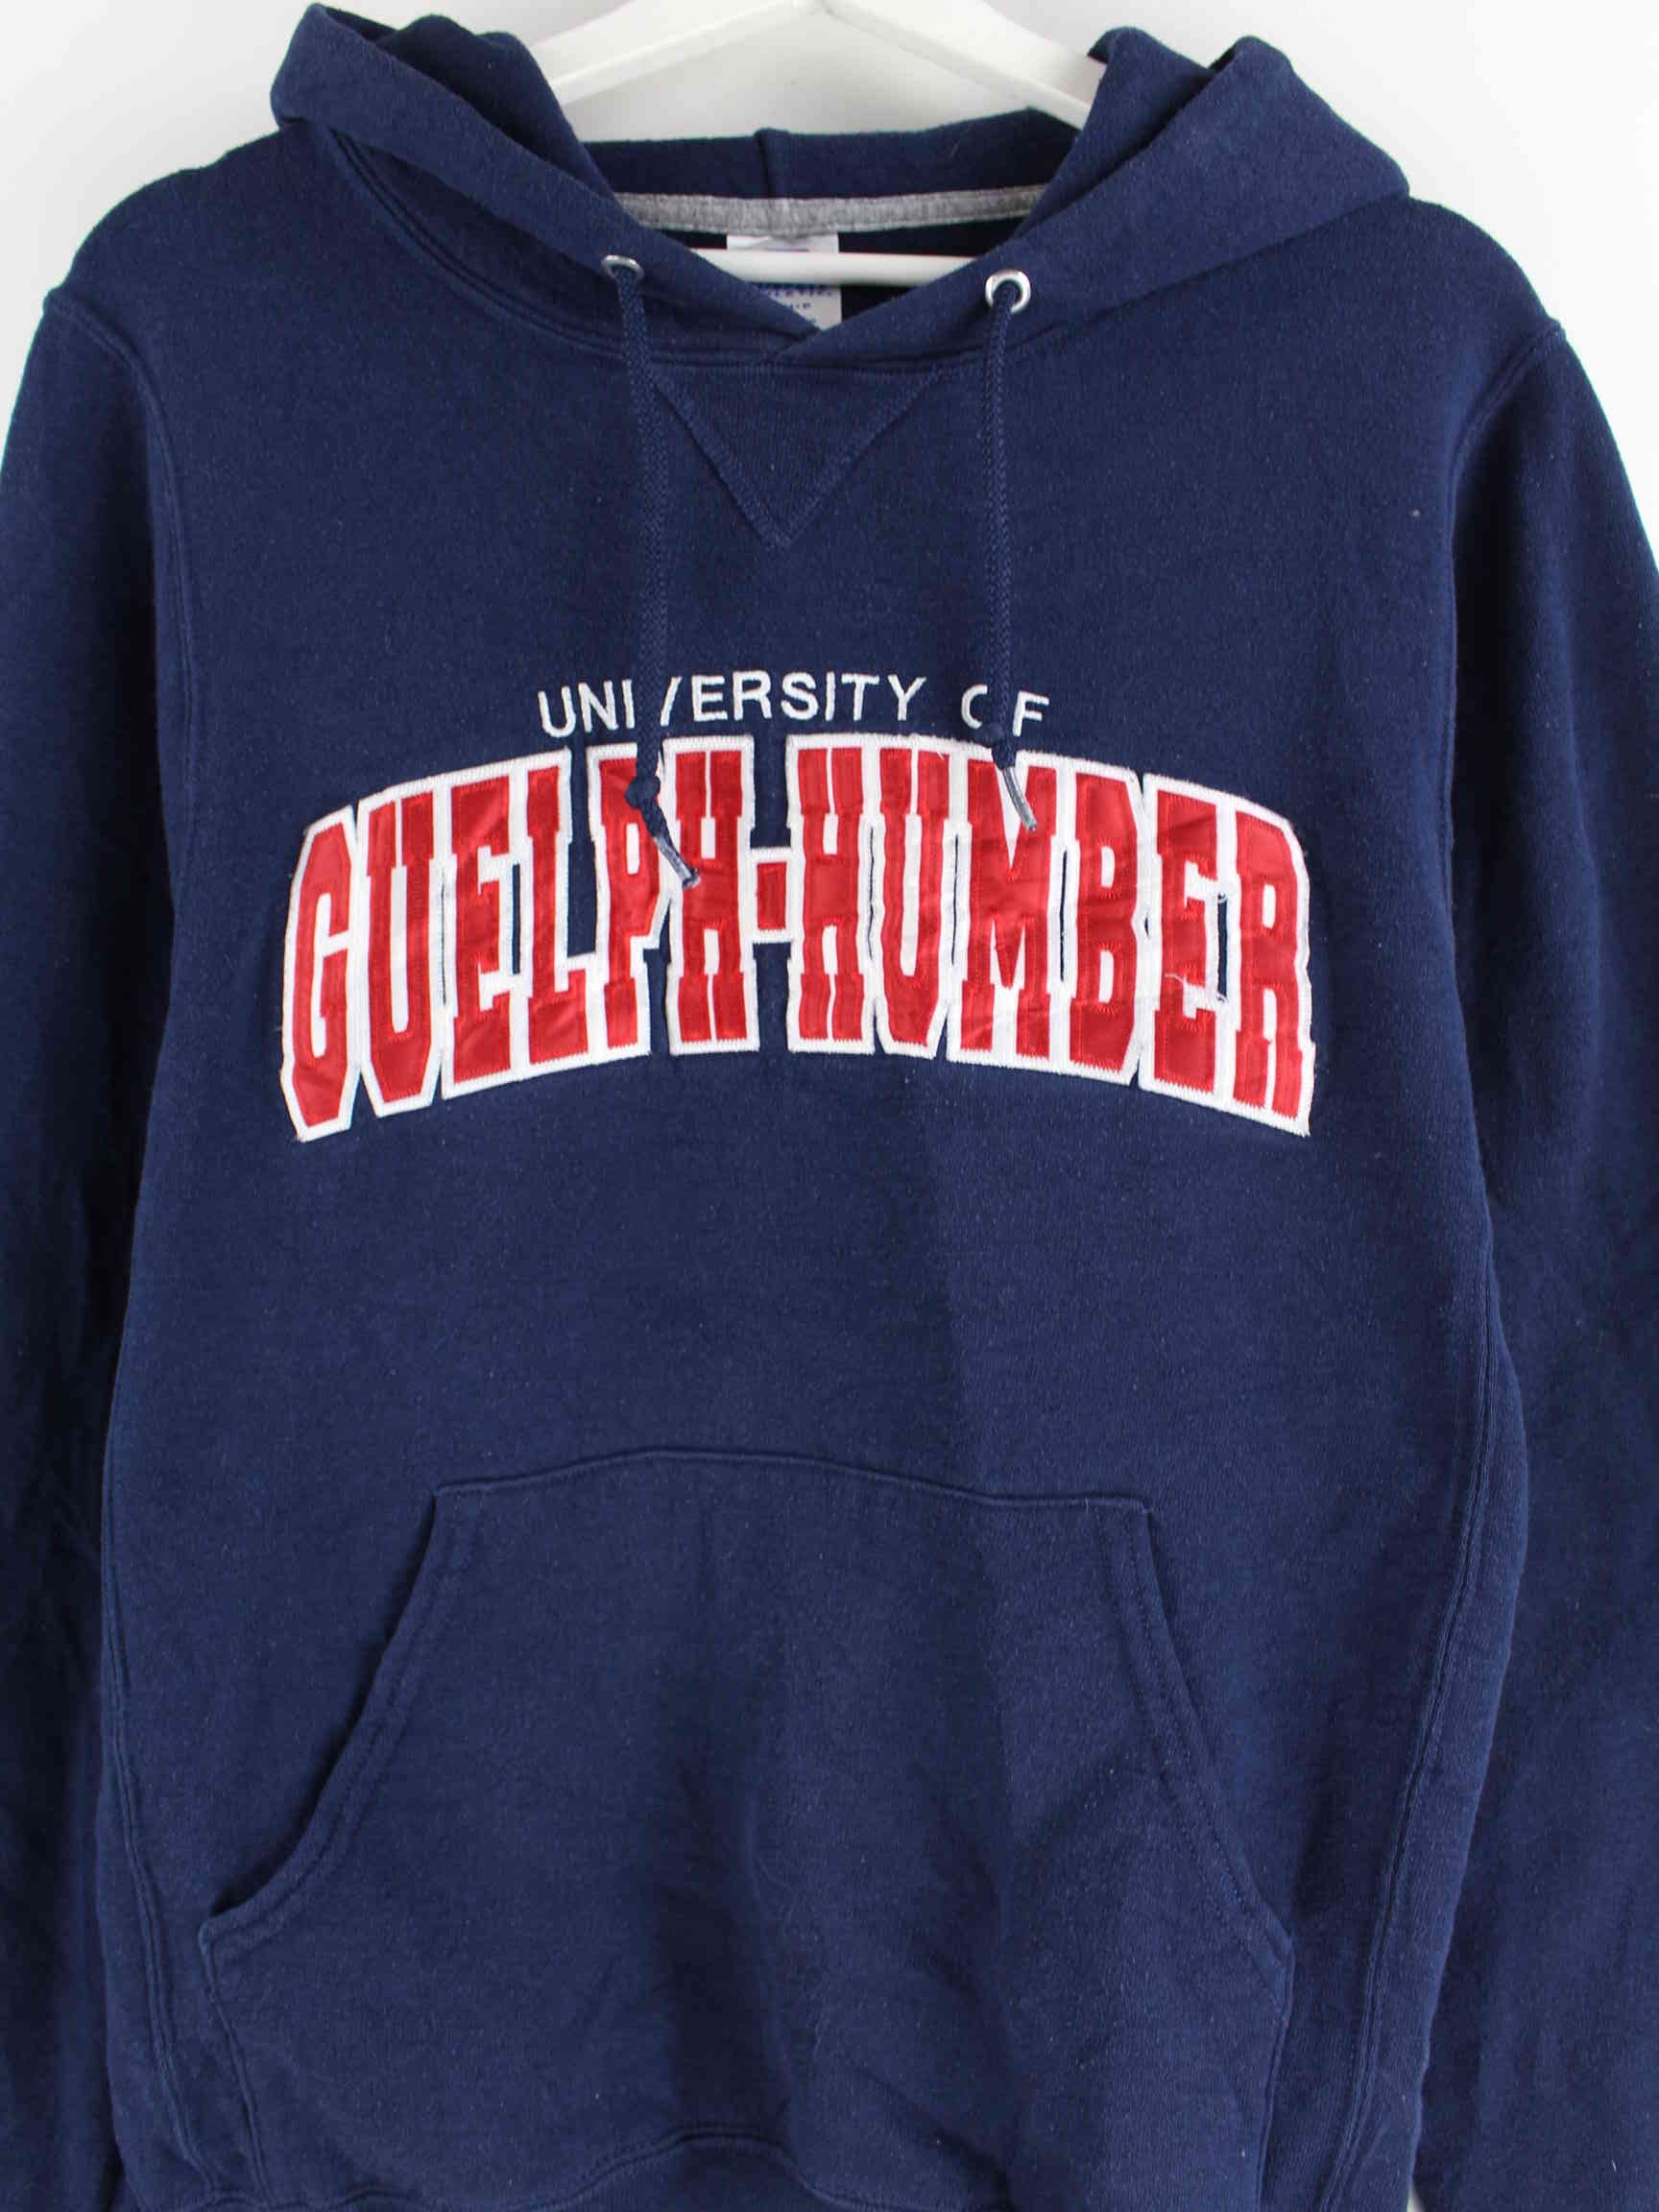 Russell Athletic Guelph-Humber Embroidered Hoodie Blau S (detail image 1)